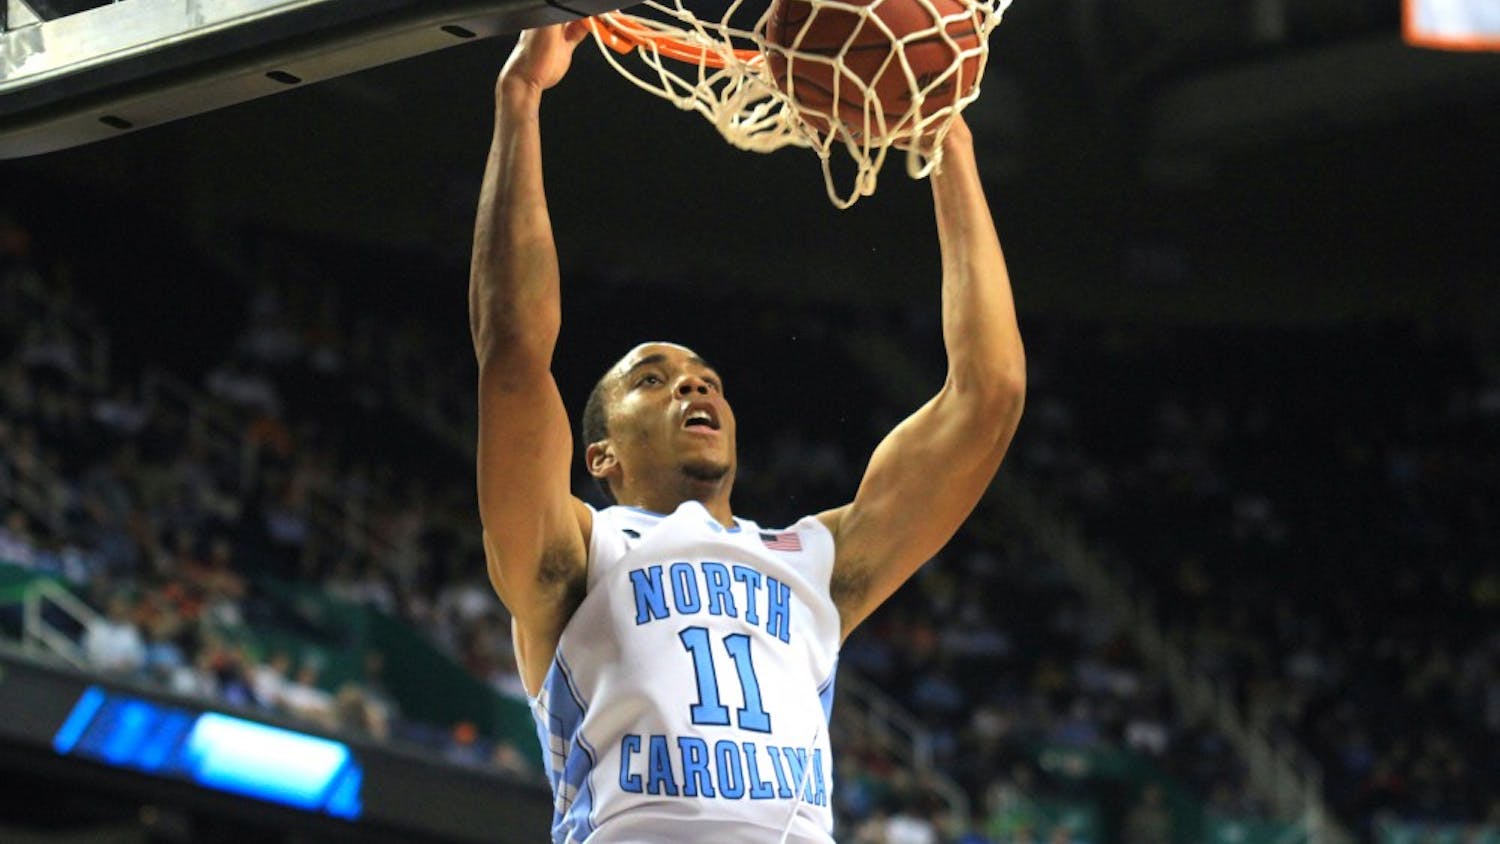 North Carolina forward Brice Johnson (11) makes a dunk. Johnson scored 17 points and grabbed 9 rebounds in Wednesday afternoon's matchup against Boston College.